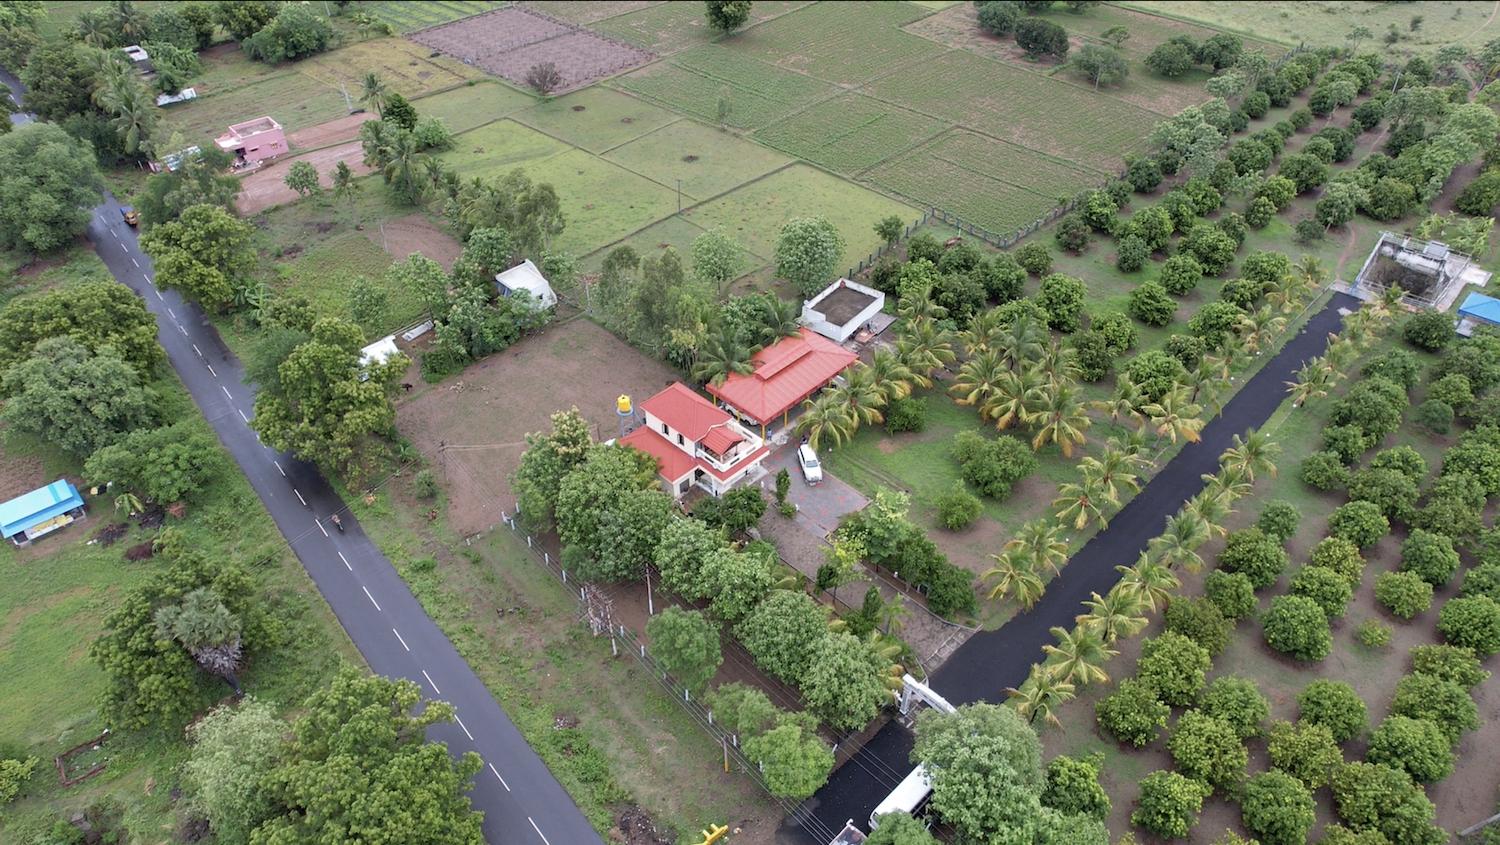 02 drone view front side - Fully Developed Farm Land in Vandavasi - Arani